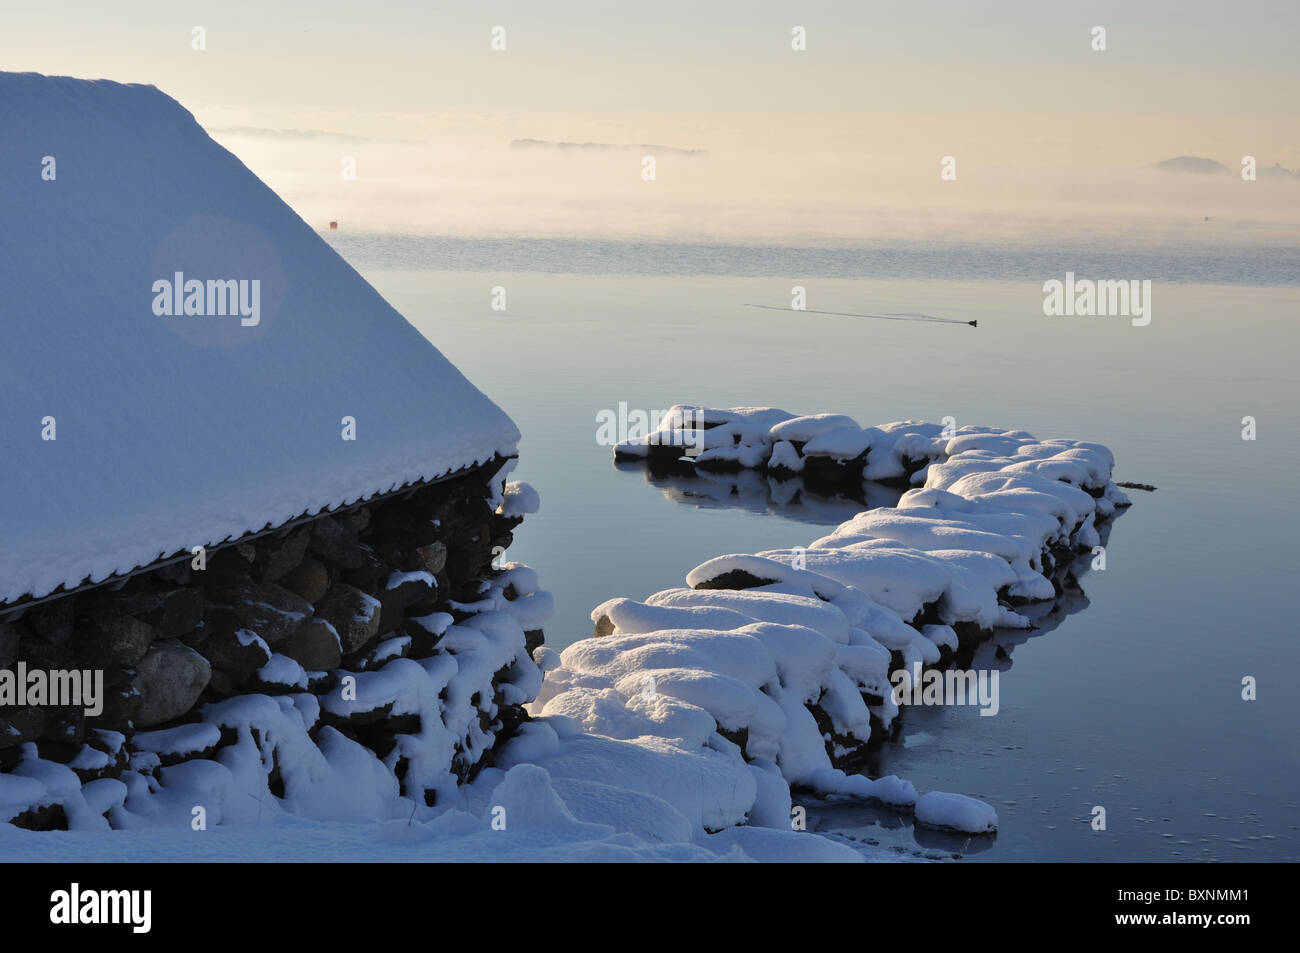 Snowy landscape by the sea, boat house, winter Stock Photo